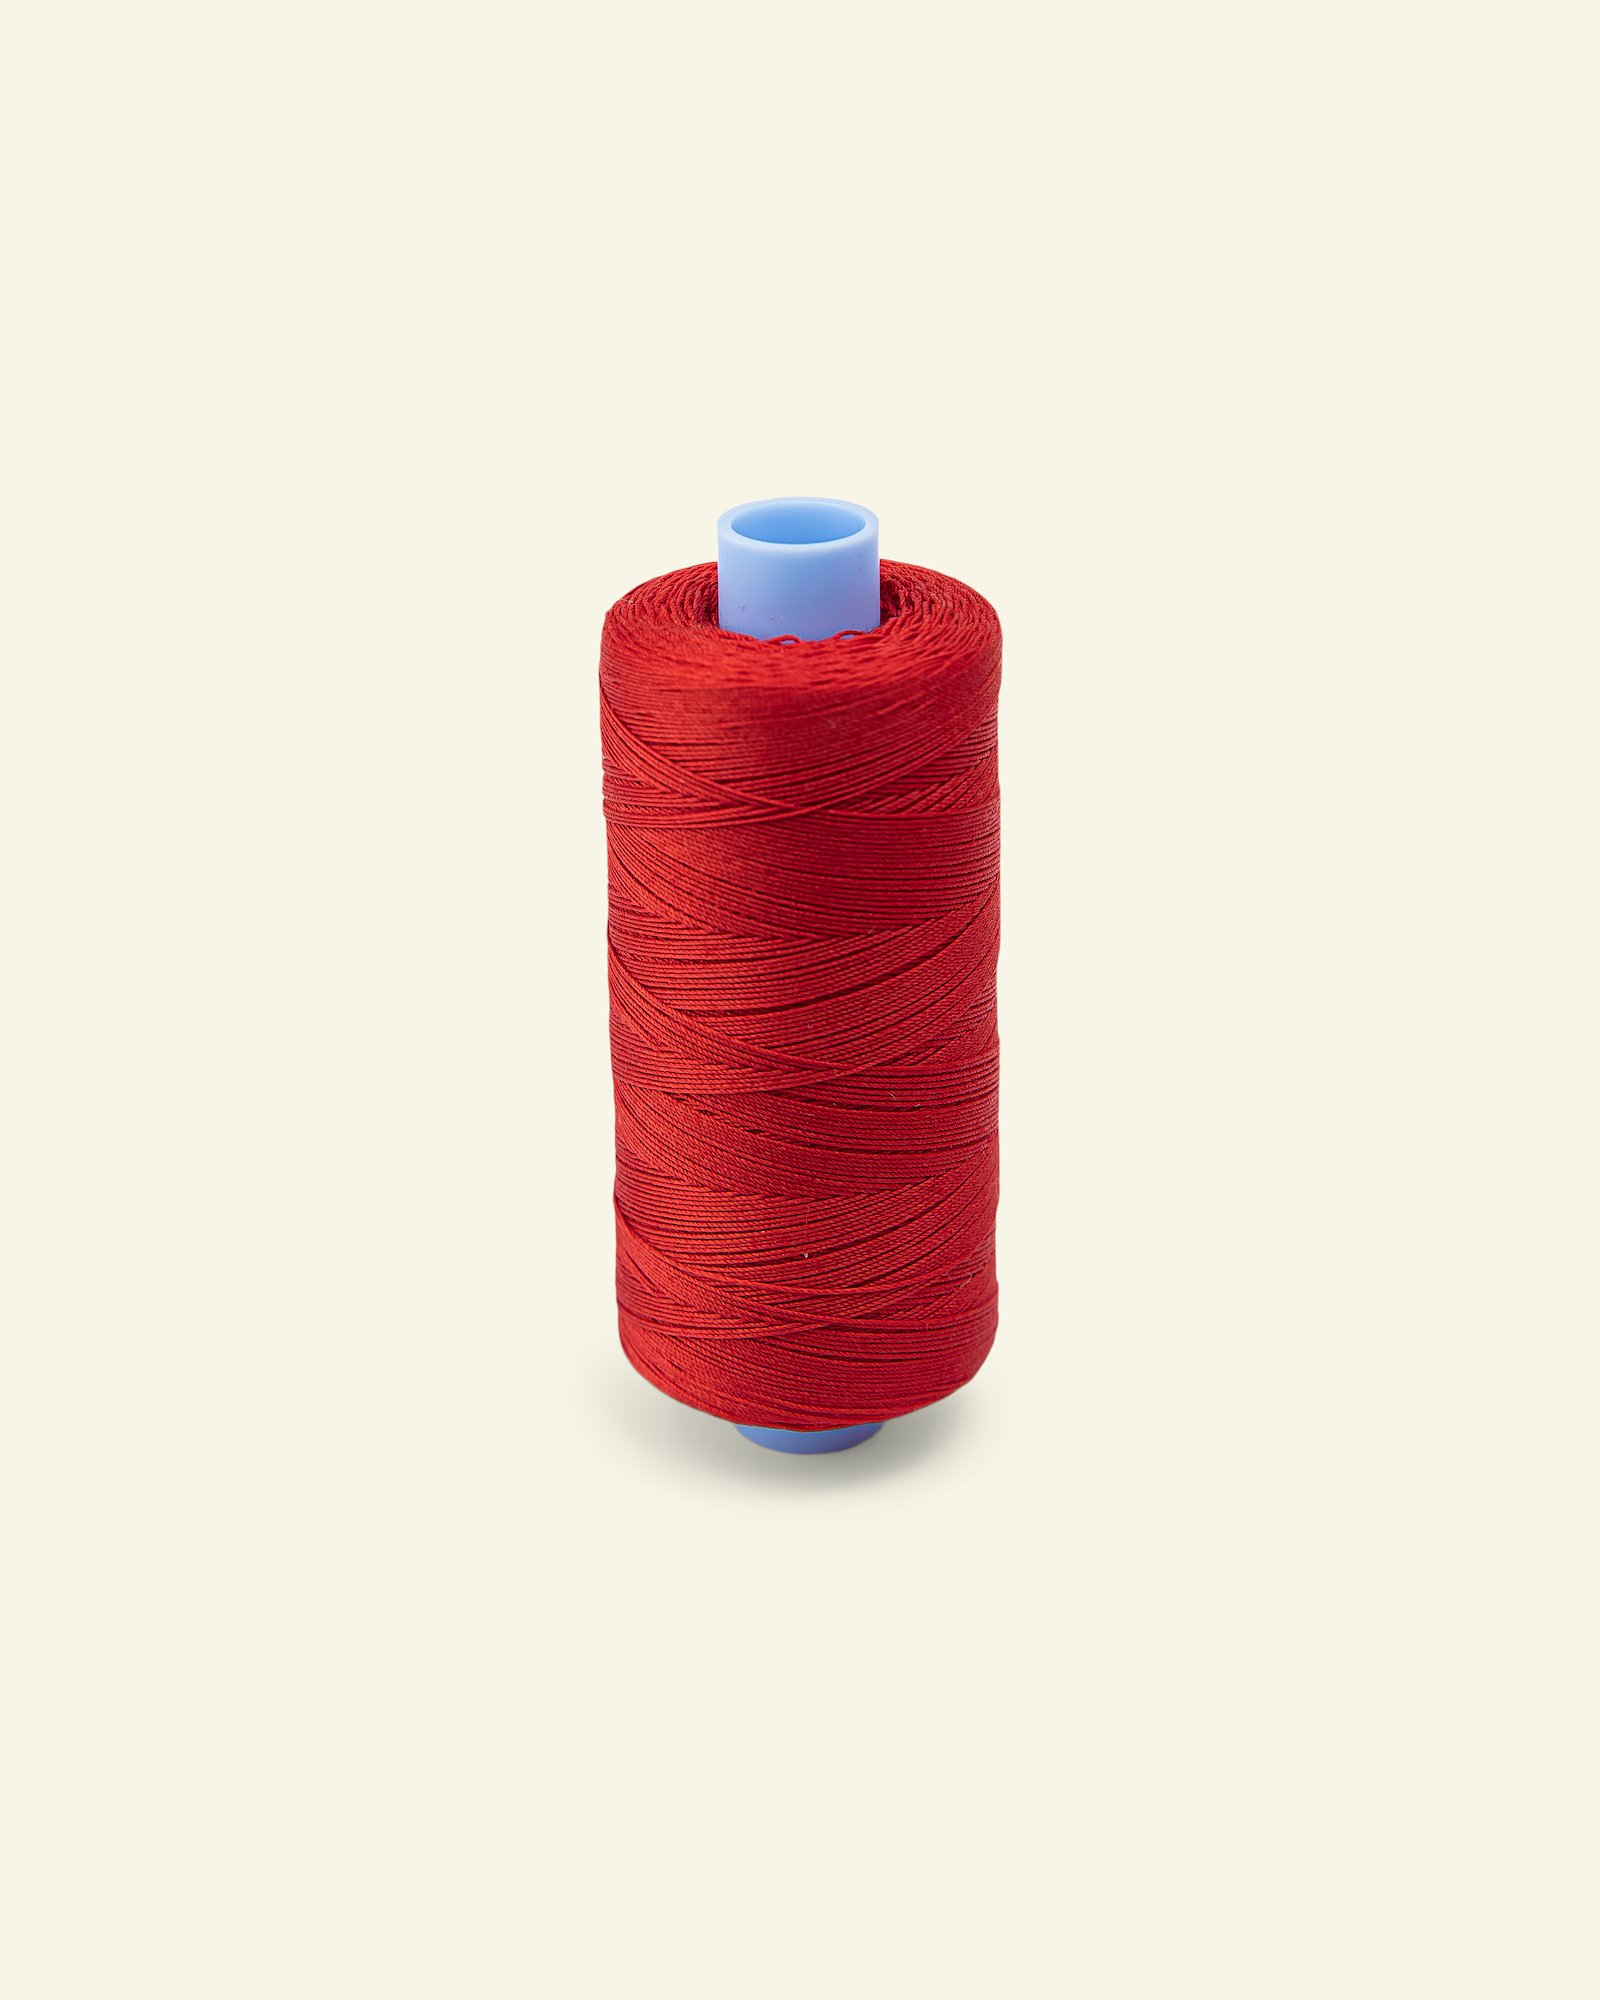 Jeans thread red 400m 15011_pack